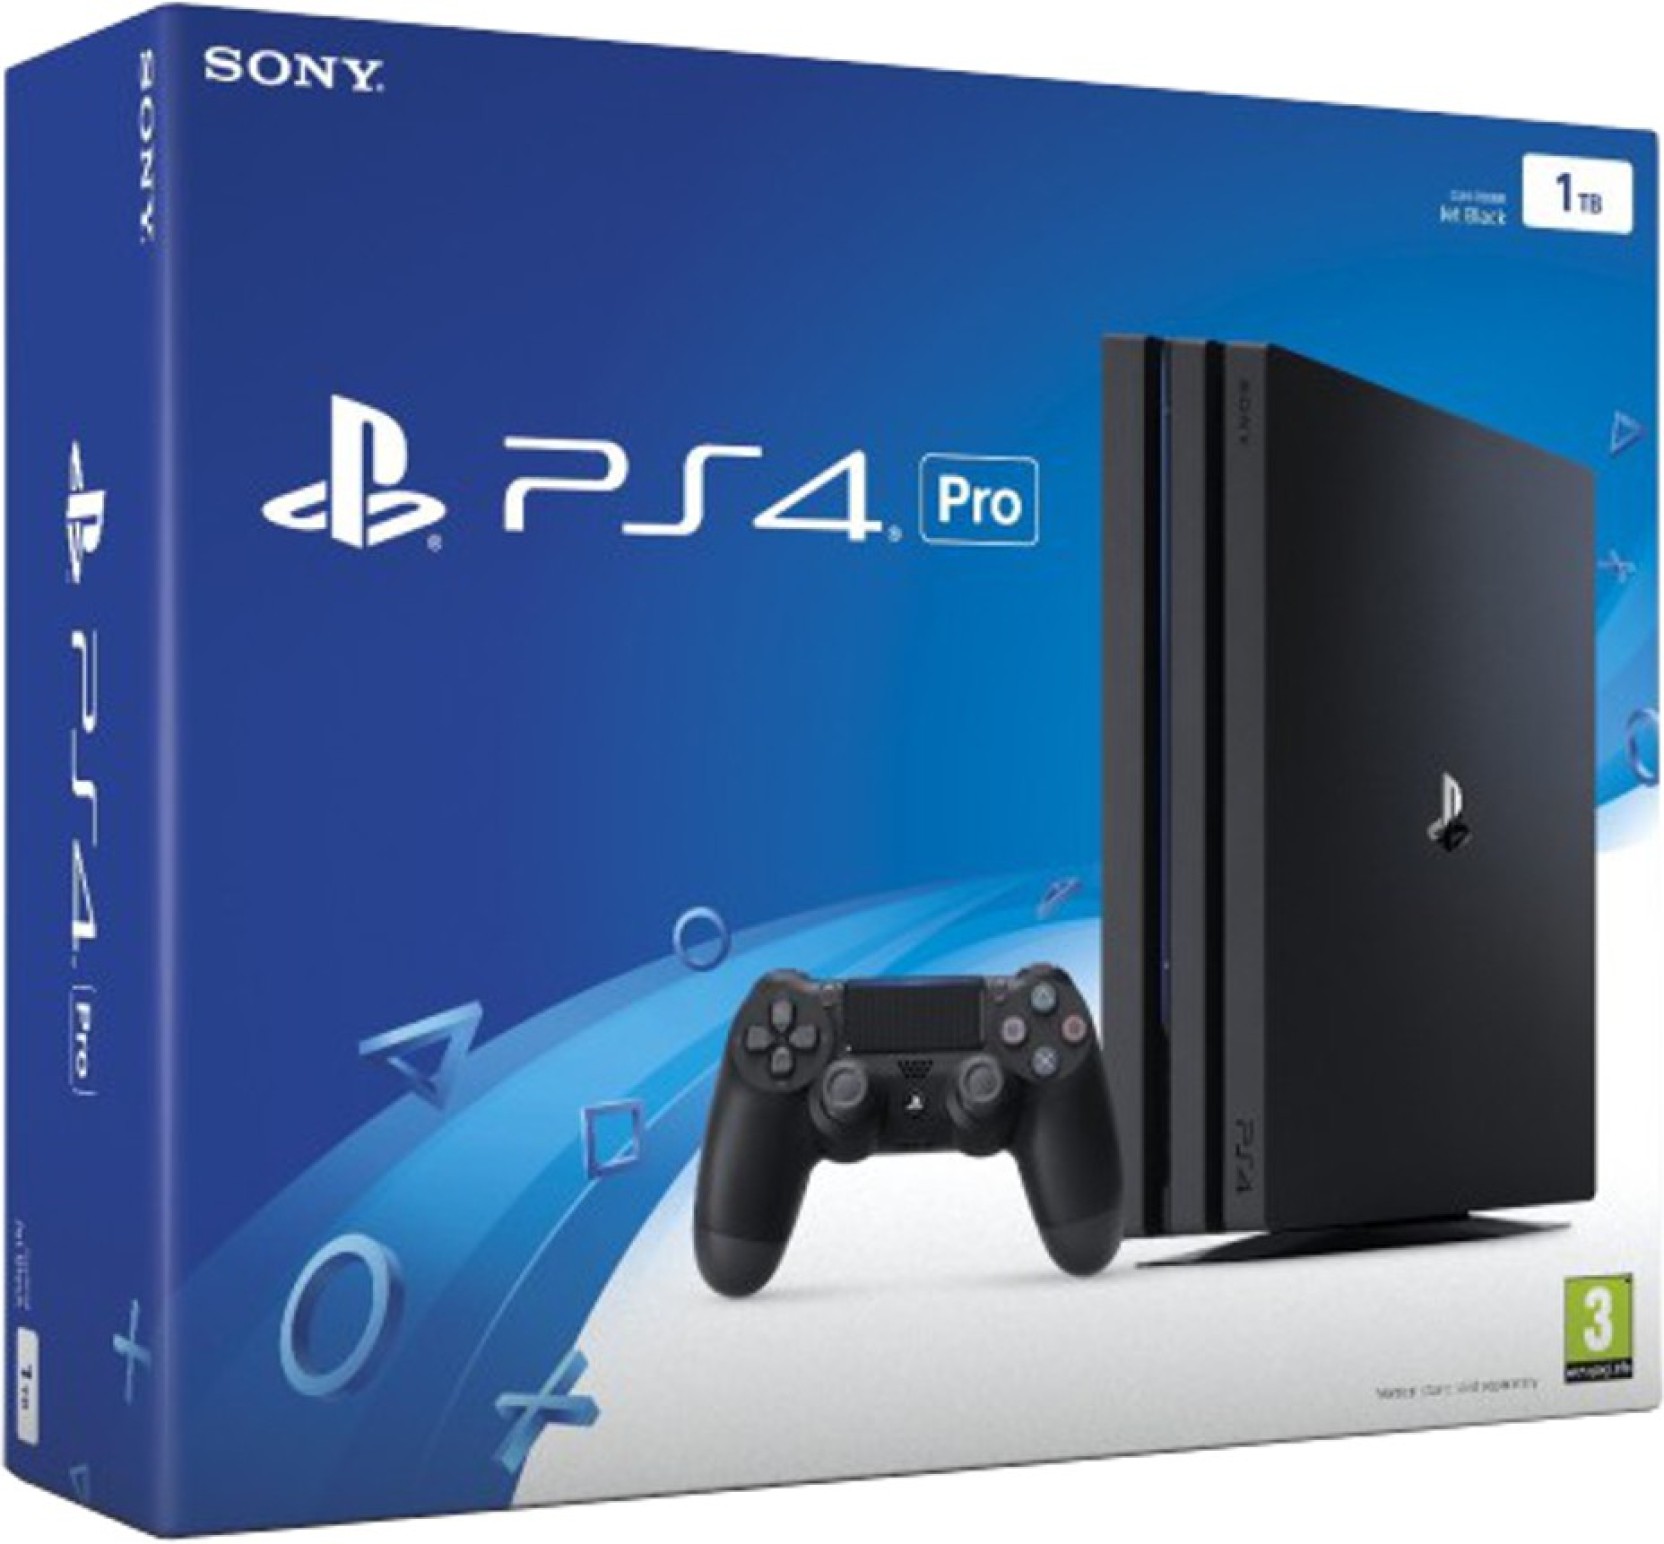 Sony PlayStation 4 (PS4) Pro 1 TB Price in India Buy Sony PlayStation